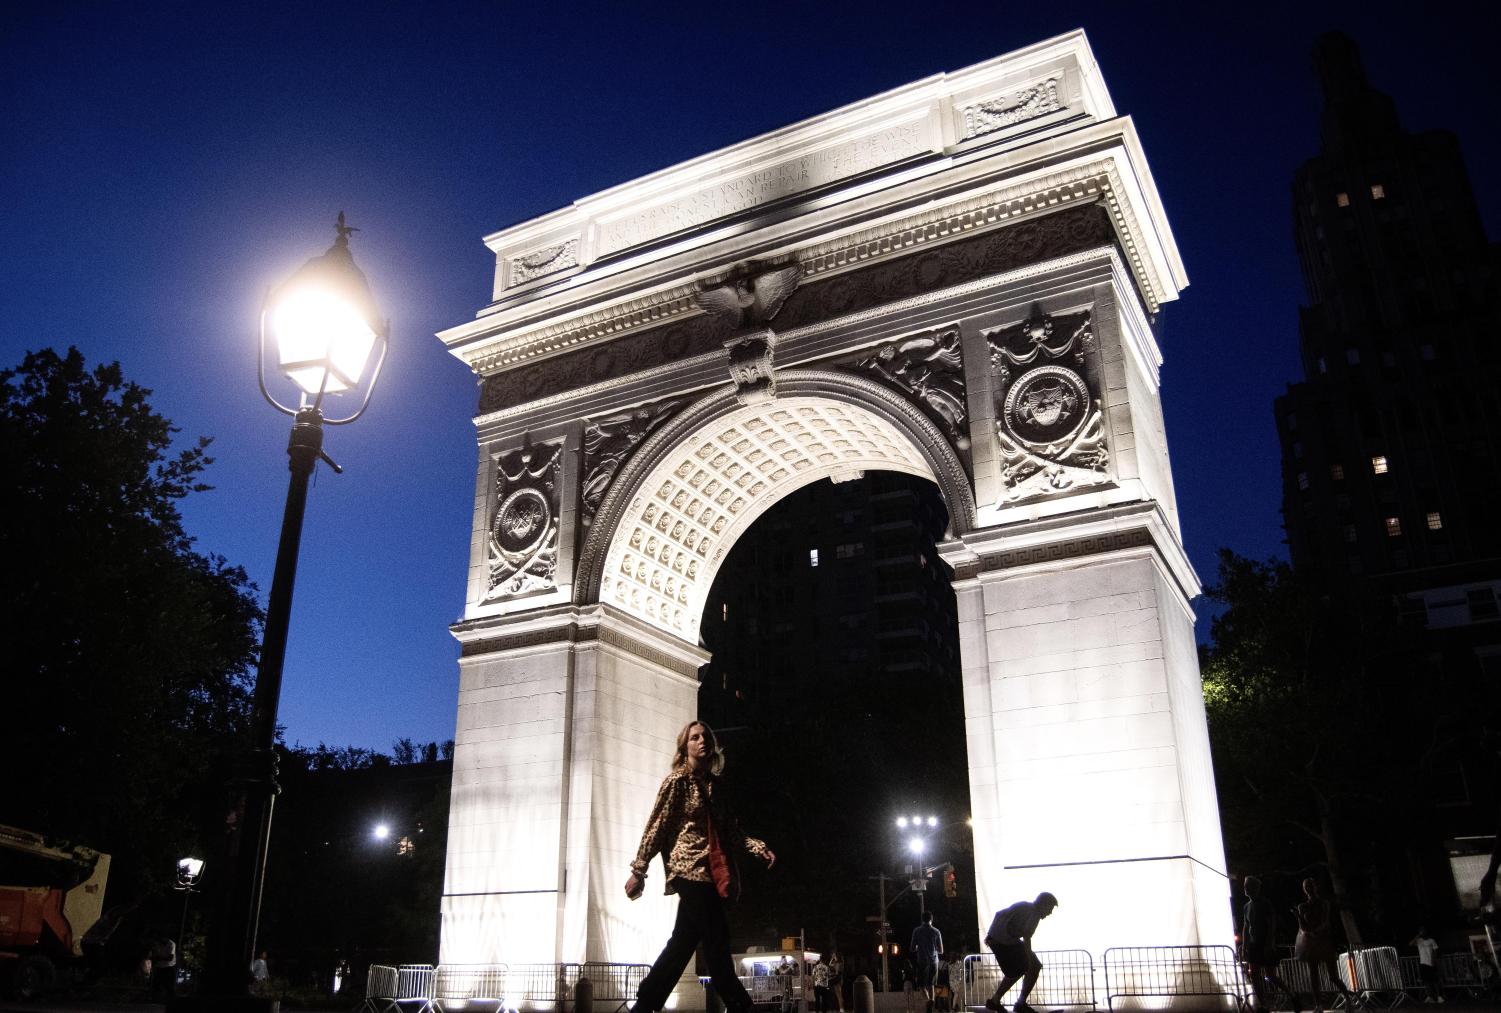 The marble Washington Square Arch illuminated by lights at night. To the left, a black lamp post, and at the bottom of the arch, a woman walking while wearing a brown long-sleeved shirt and black pants.